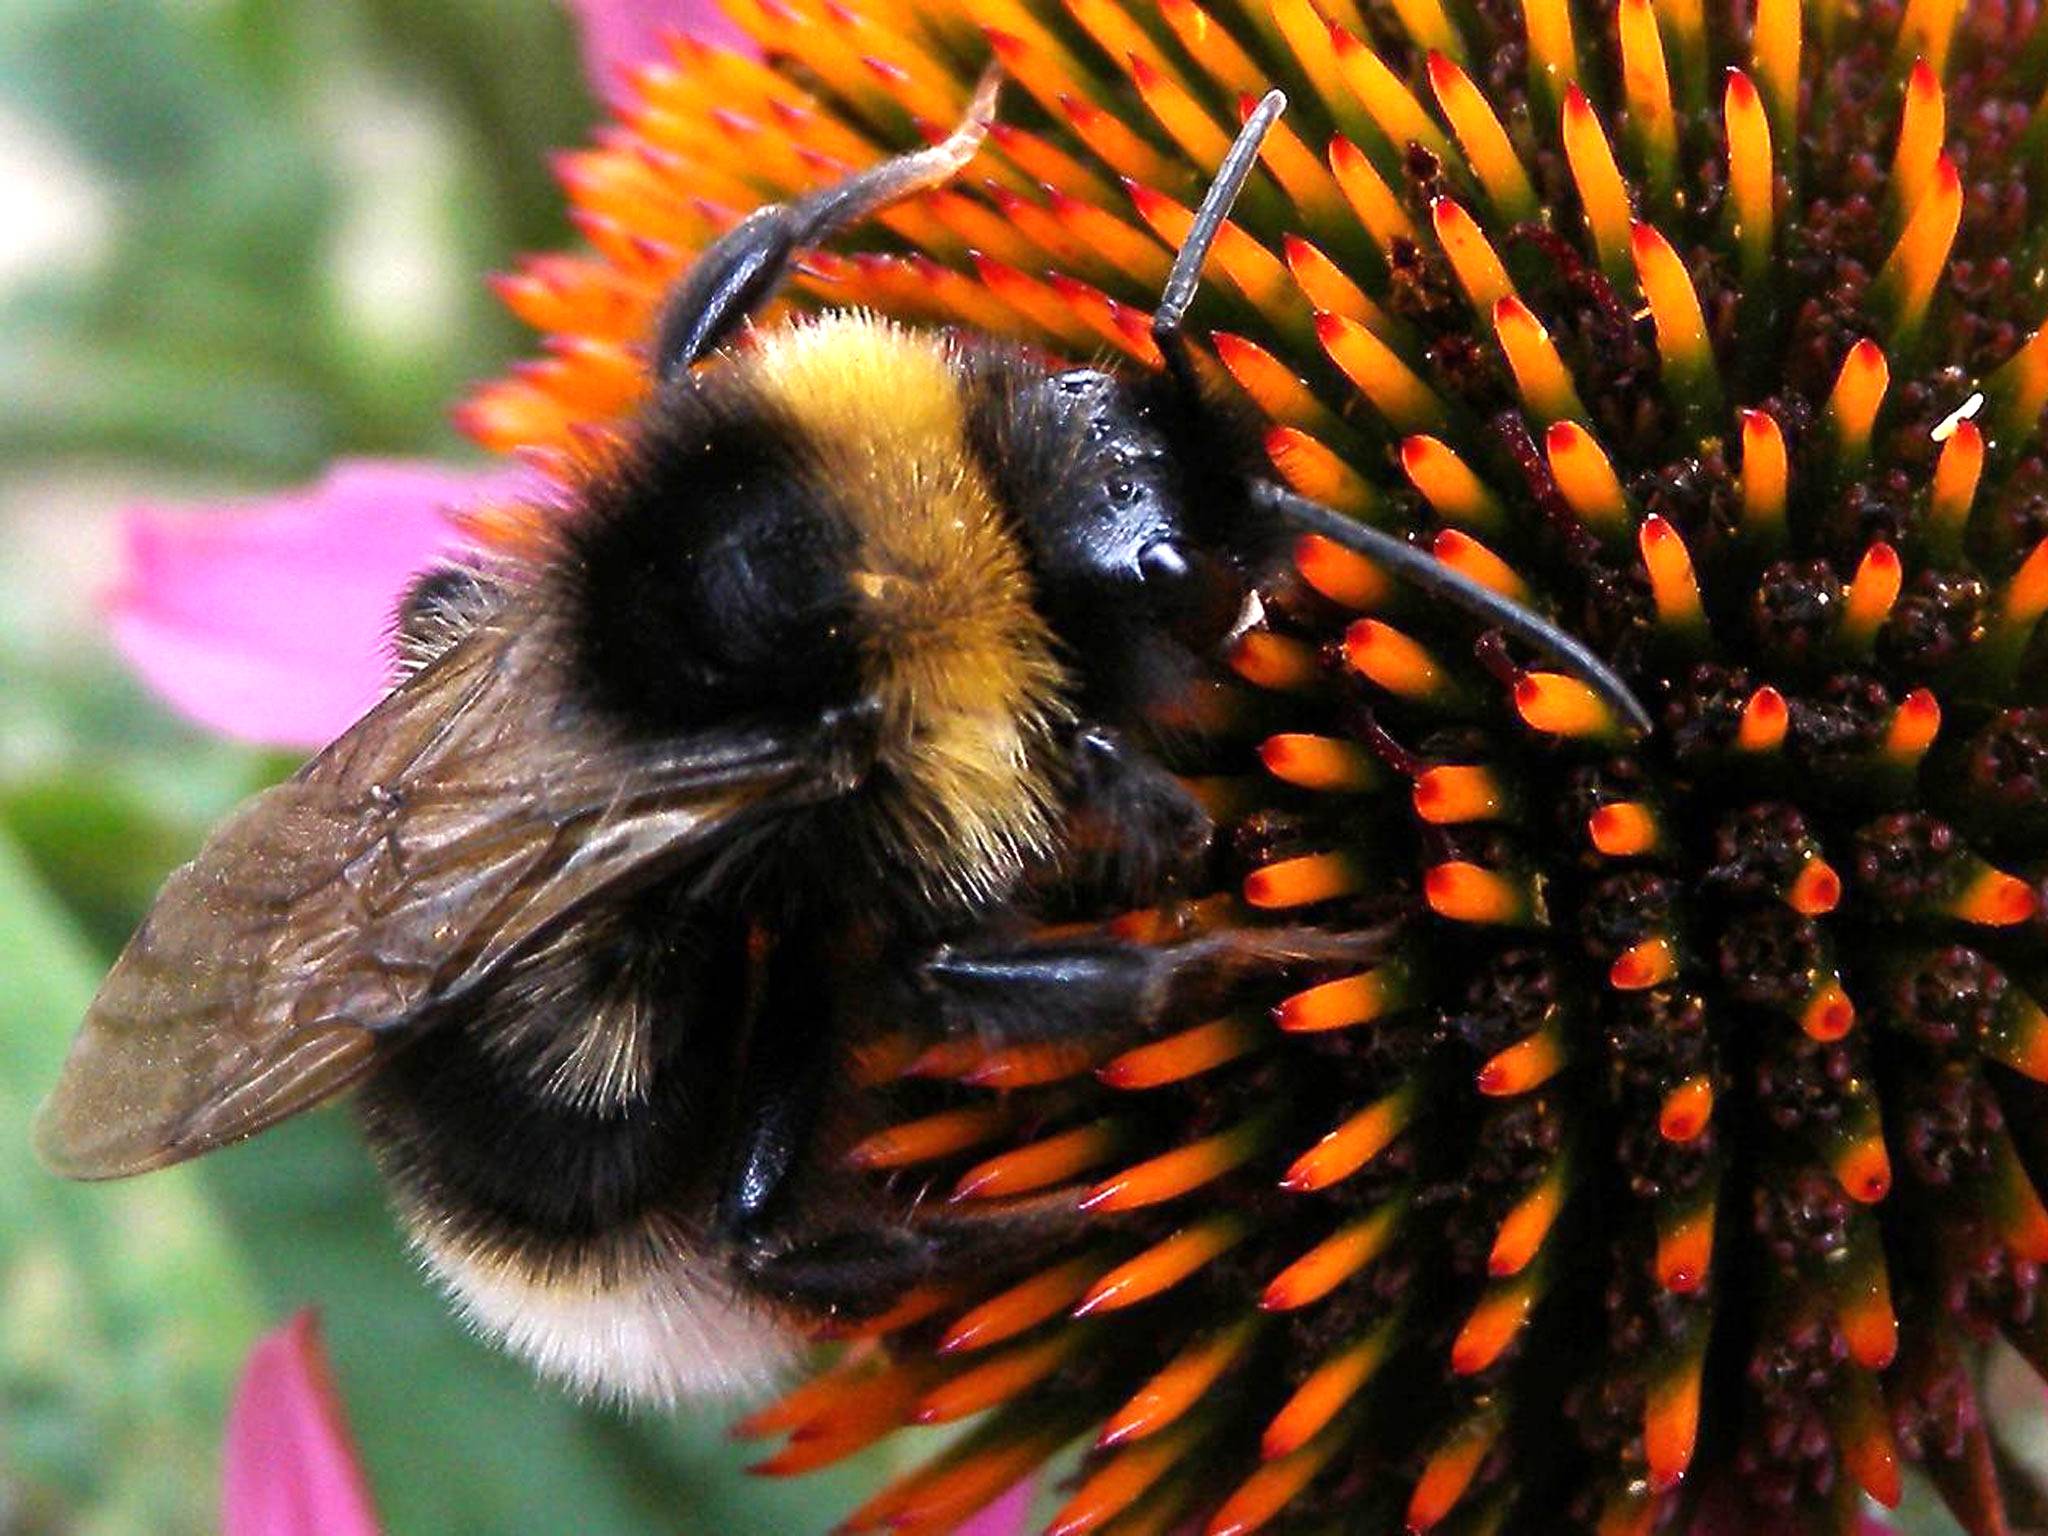 Hungry bumblebees travel more than a mile to find food